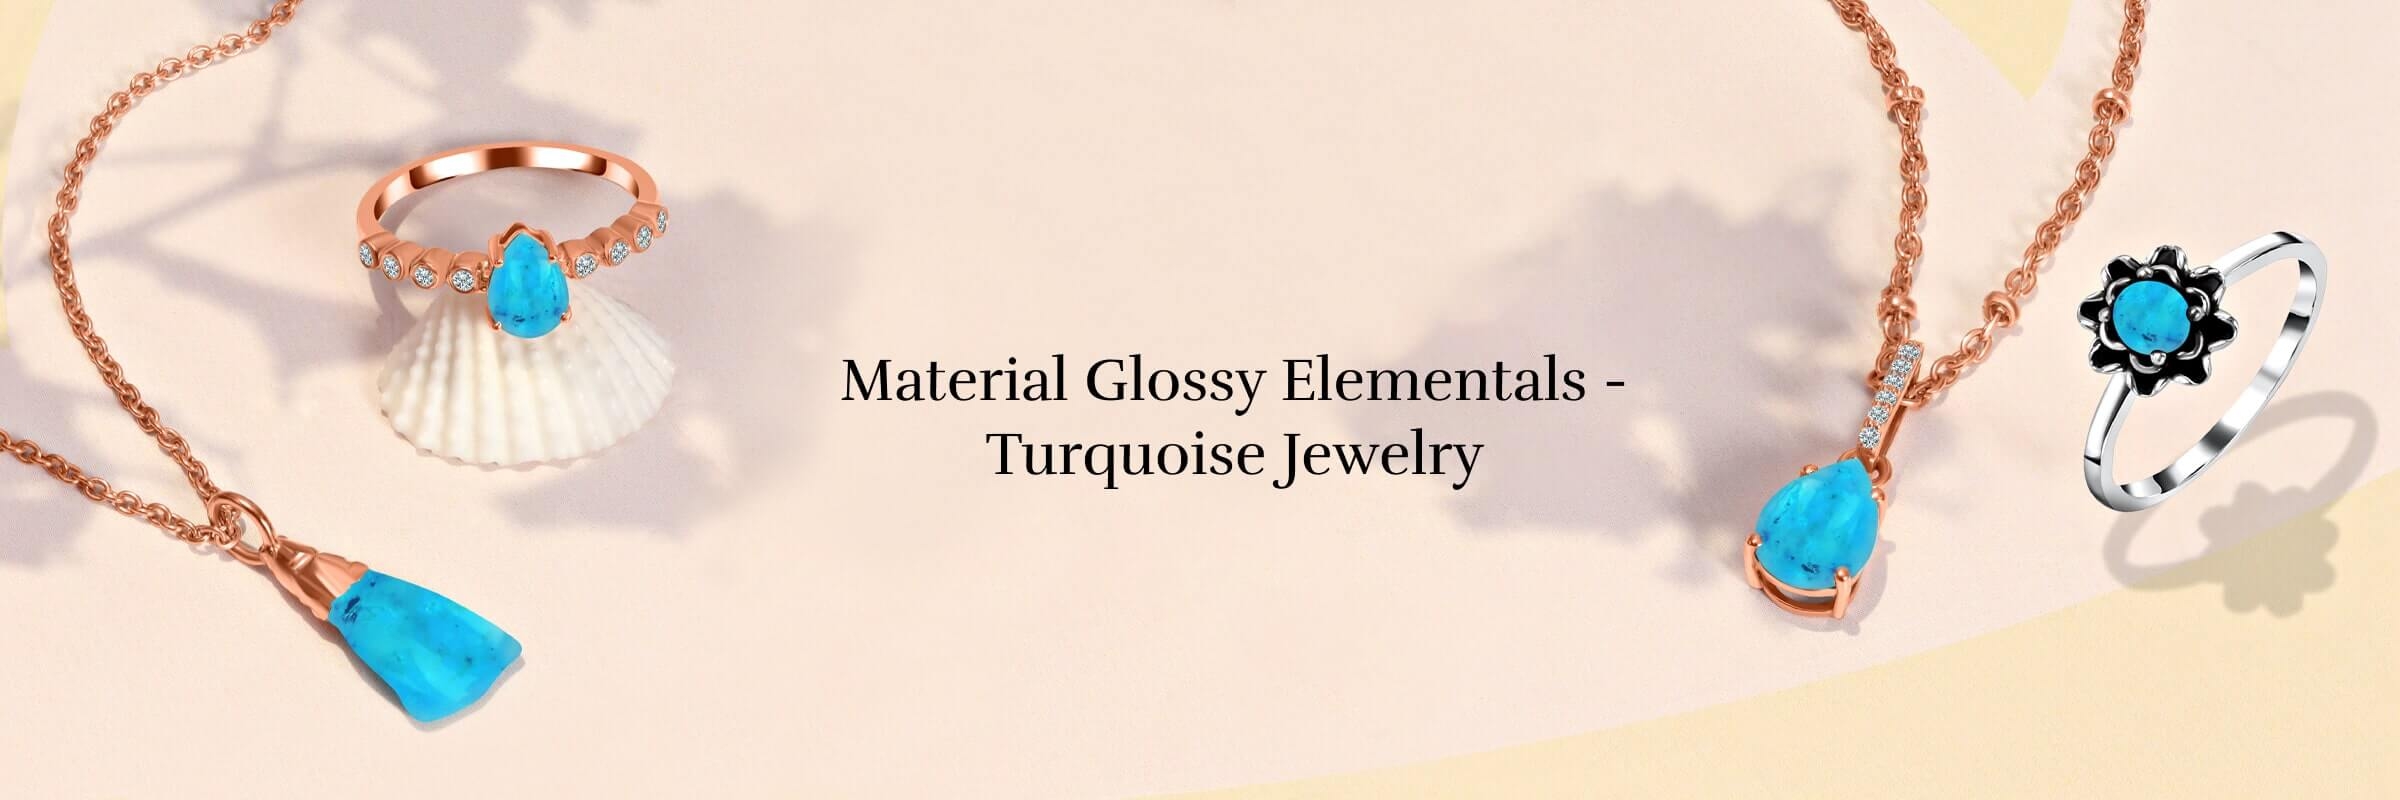 Physical Properties of Turquoise Plain Silver Jewelry